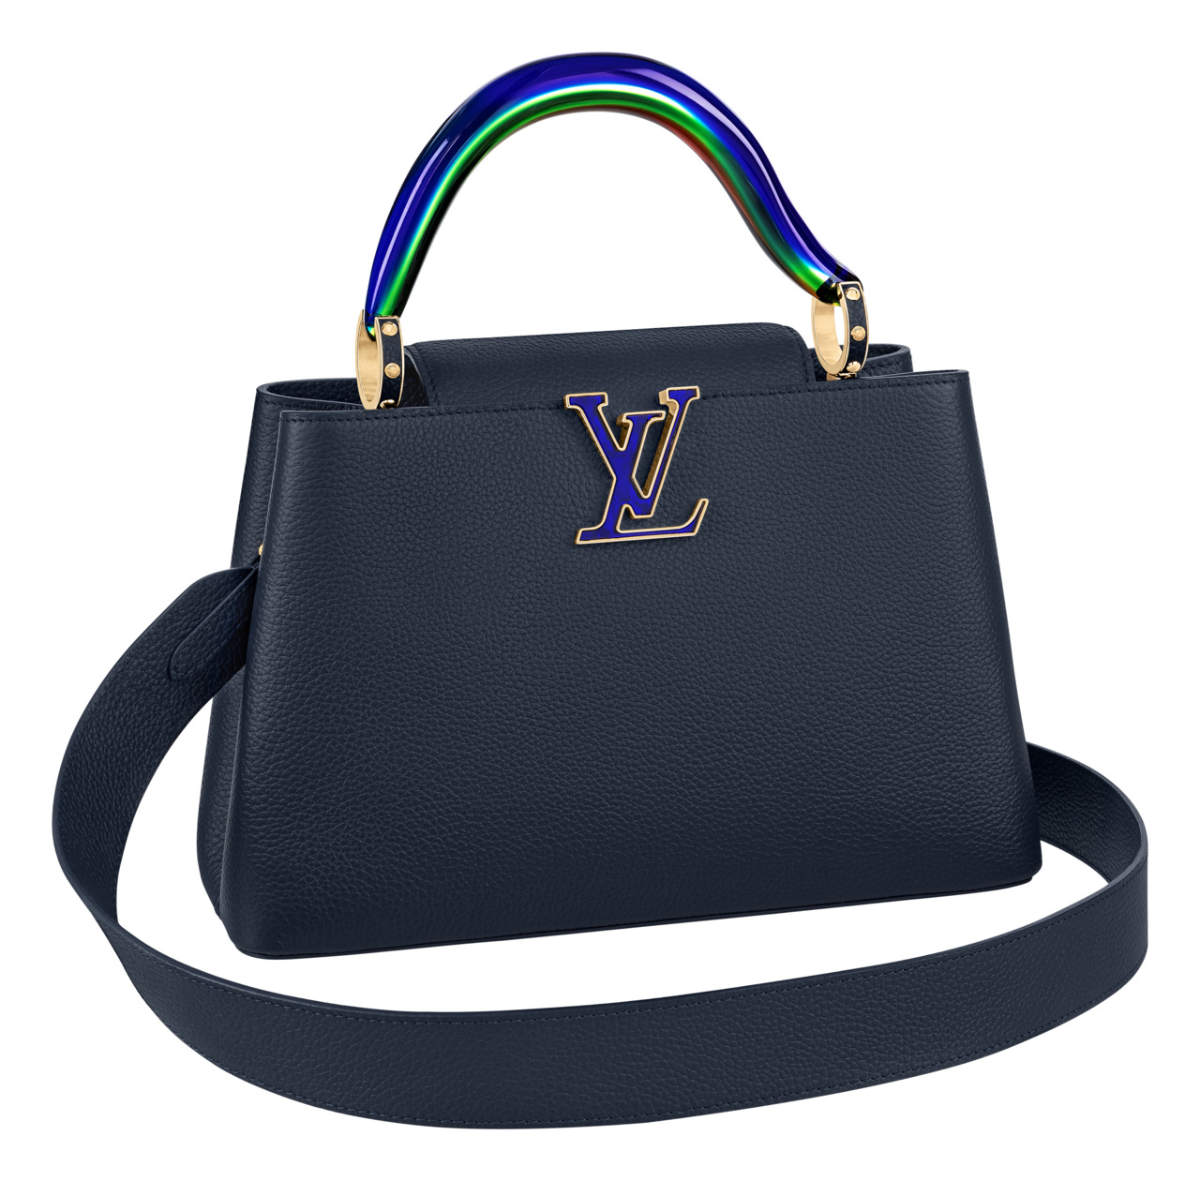 The Louis Vuitton Capucines Bag Is Our New Wear-Anywhere Bag